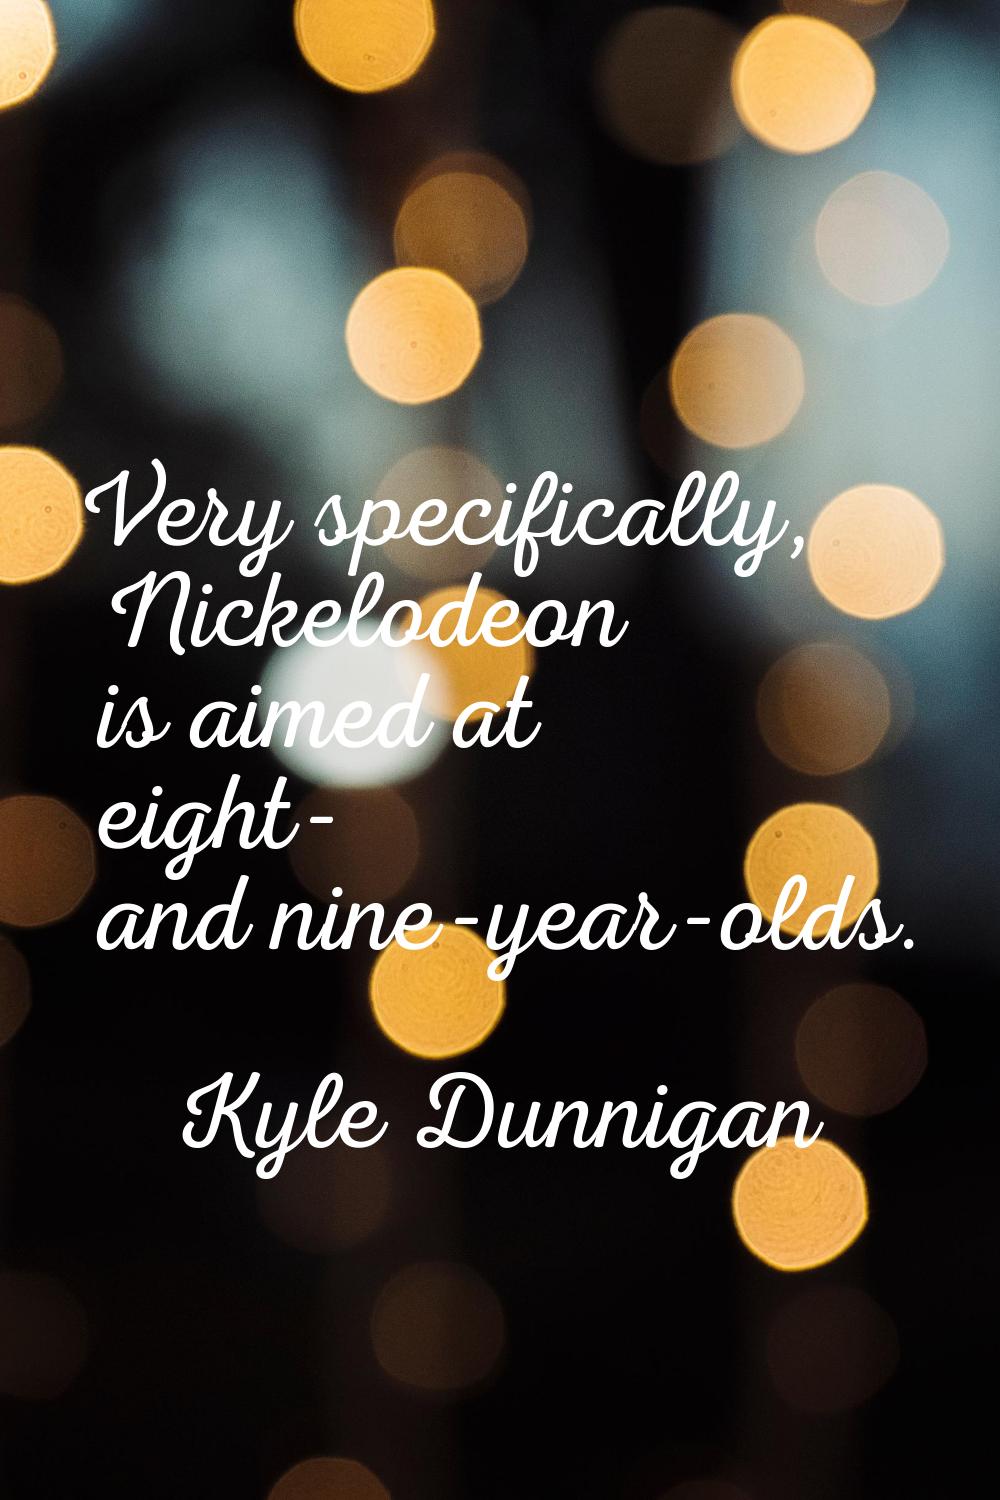 Very specifically, Nickelodeon is aimed at eight- and nine-year-olds.